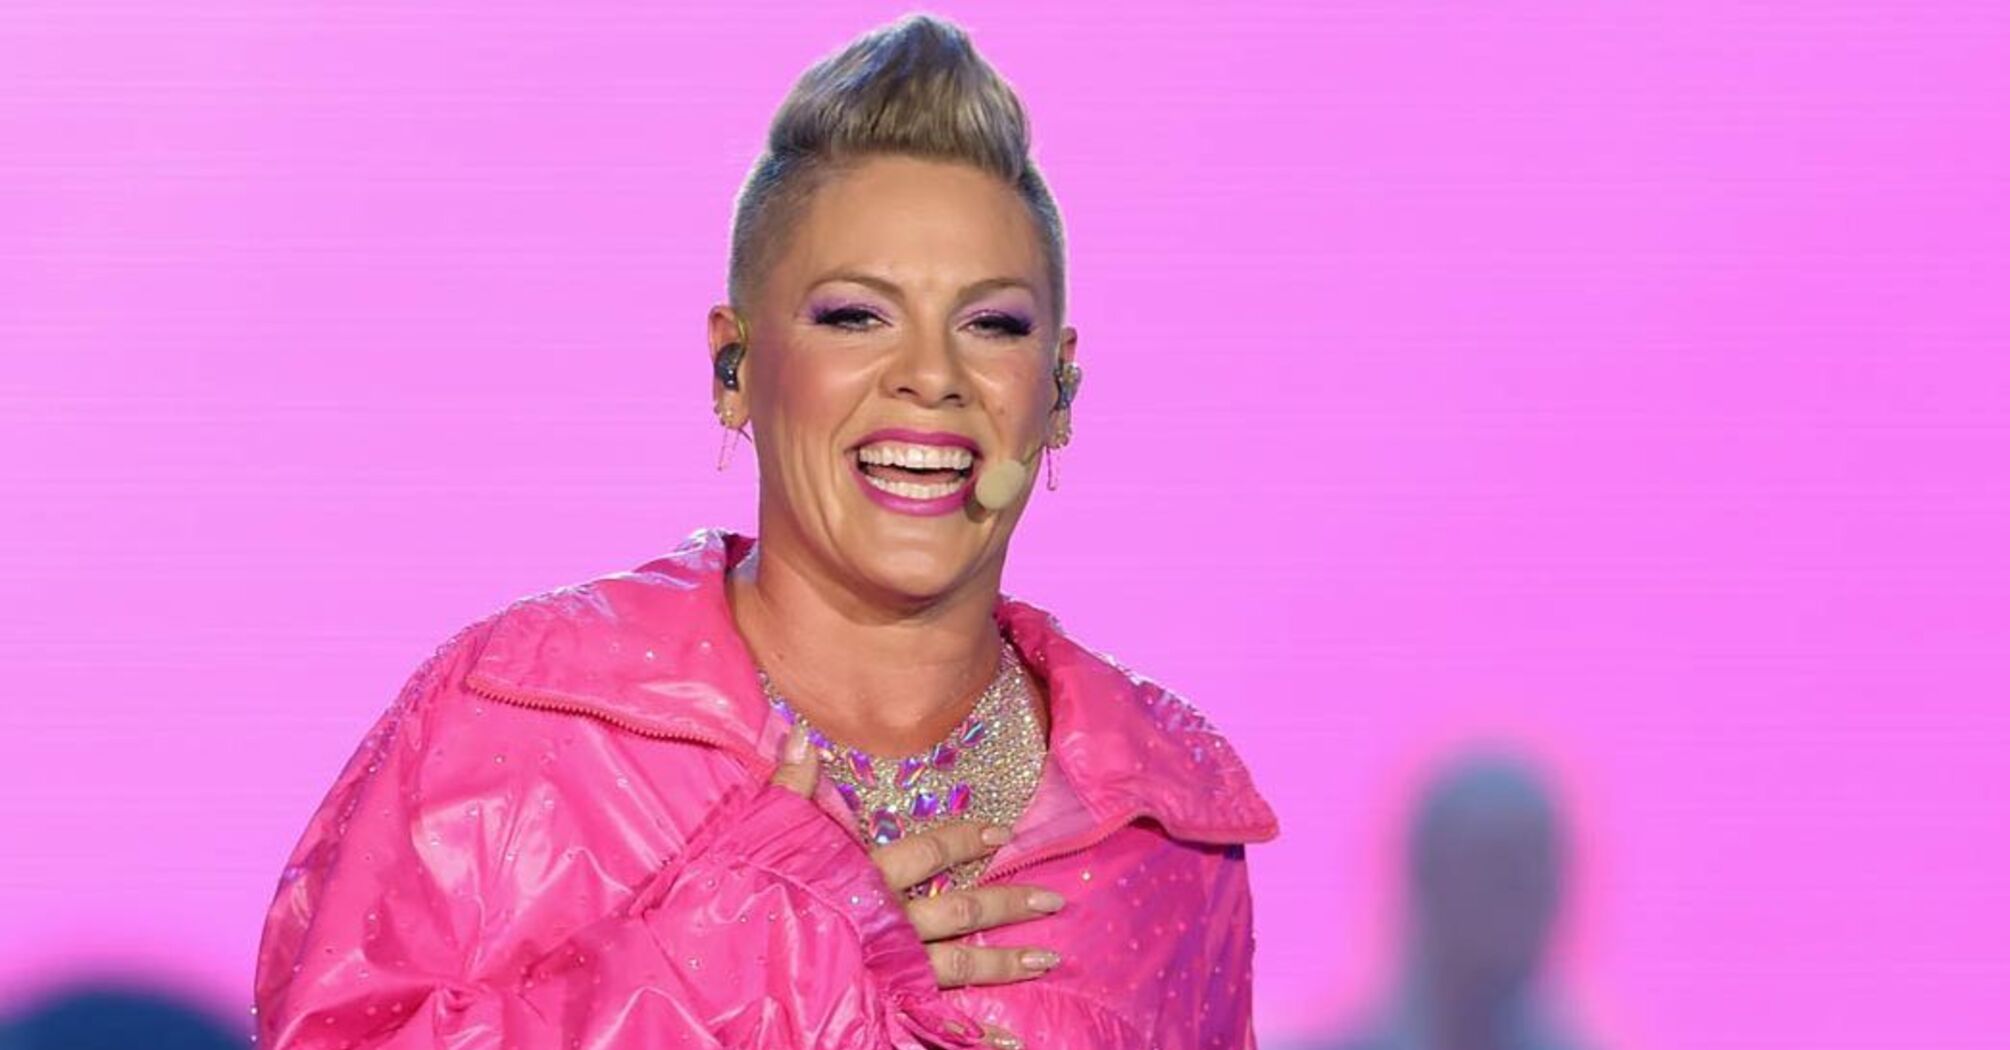 5 interesting facts about pop star Pink that you might not know